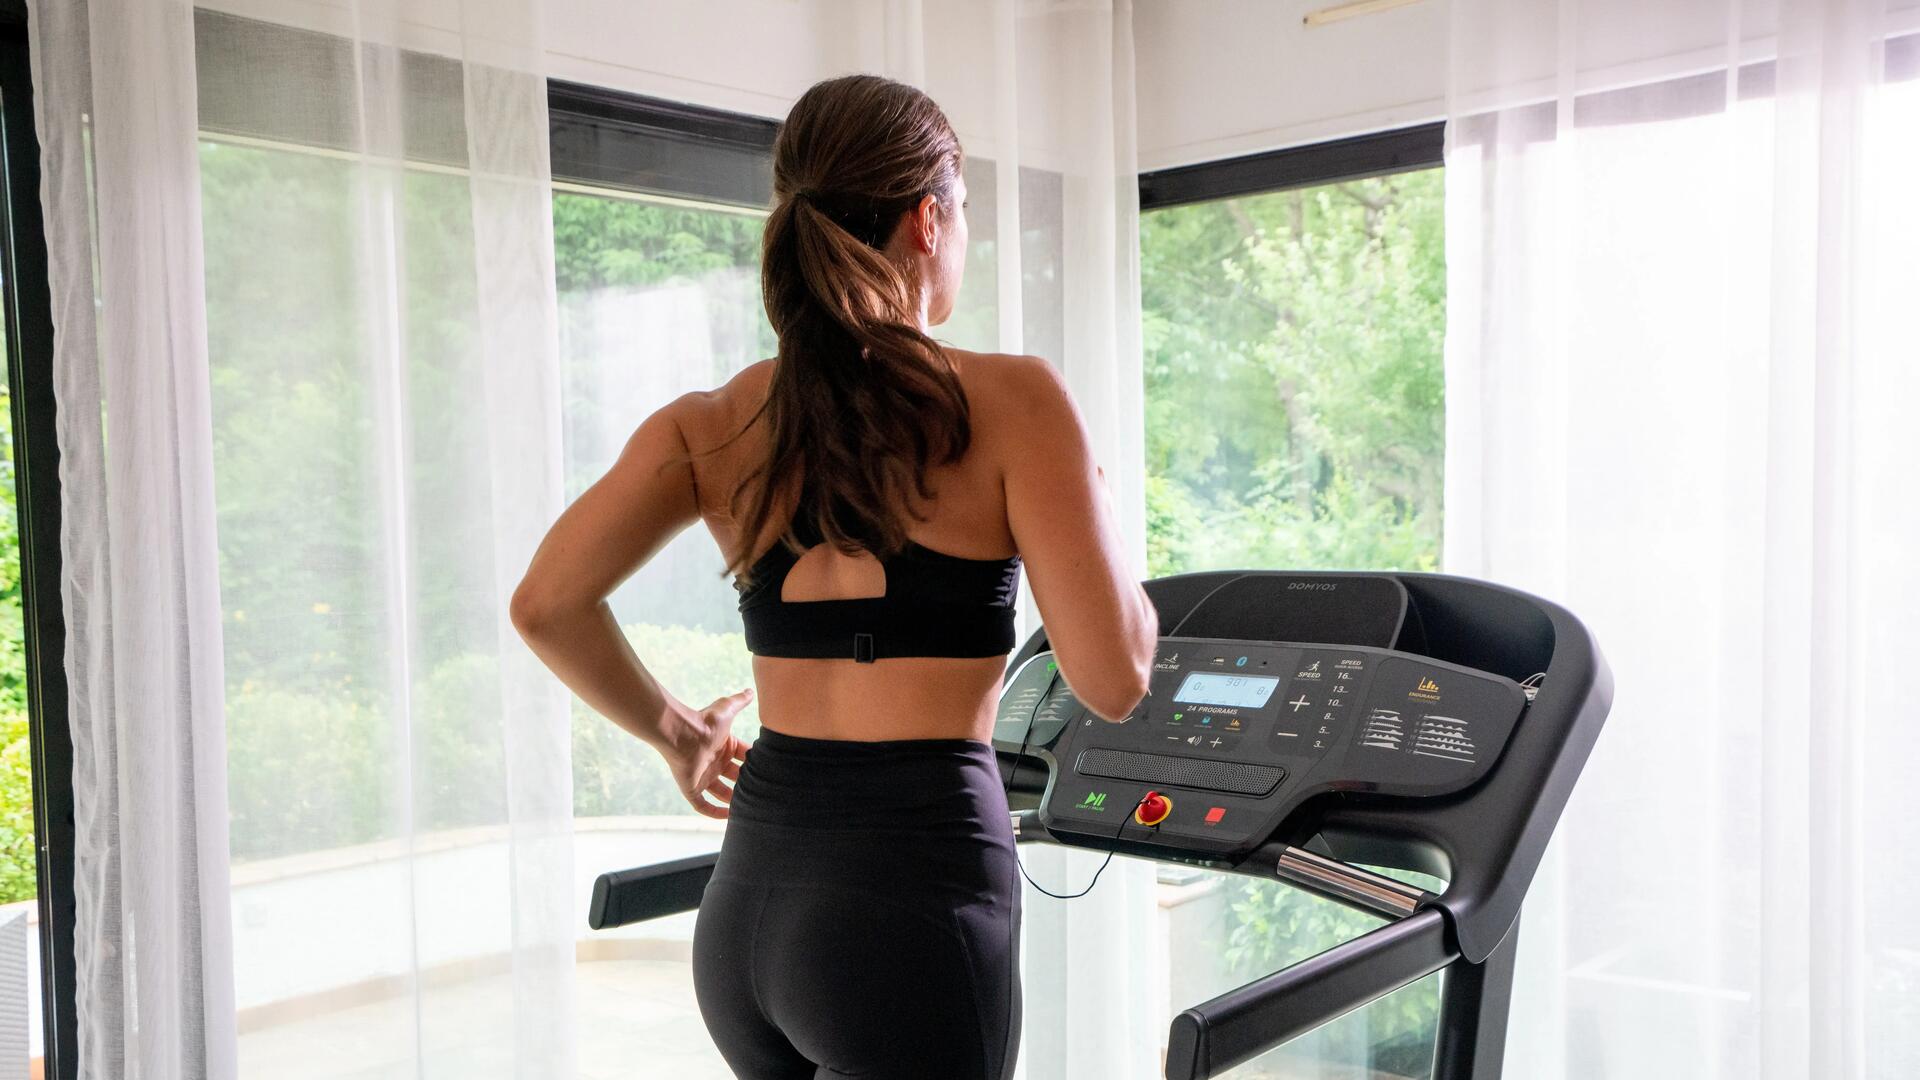 Optional session treadmill weight-loss programme 